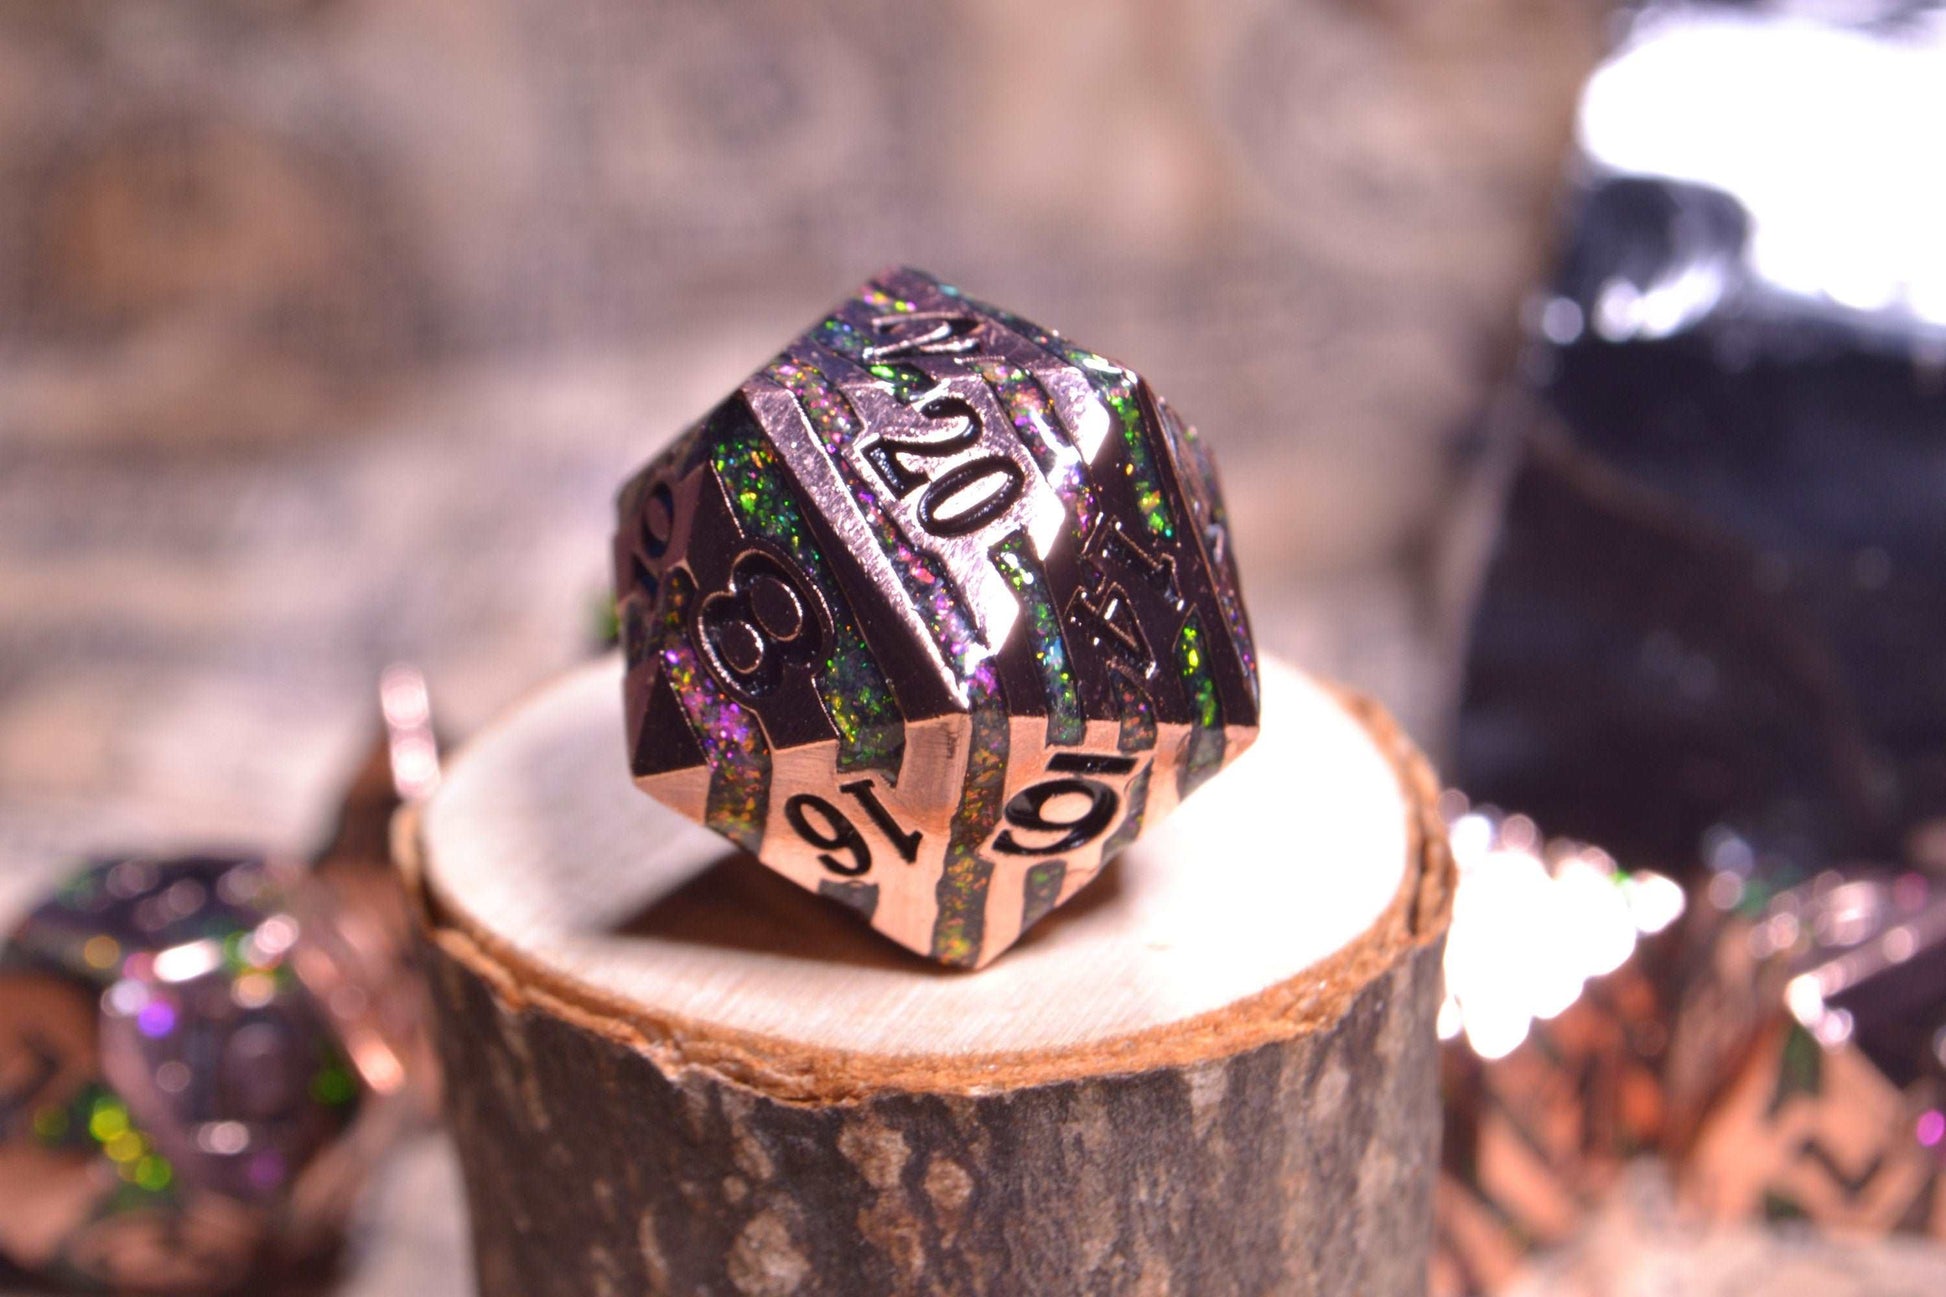 Alchemist - Copper Metal D&D Dice Set With purple and green resin stripes and Engraved Numbering - For Dungeons and Dragons - Gift Set